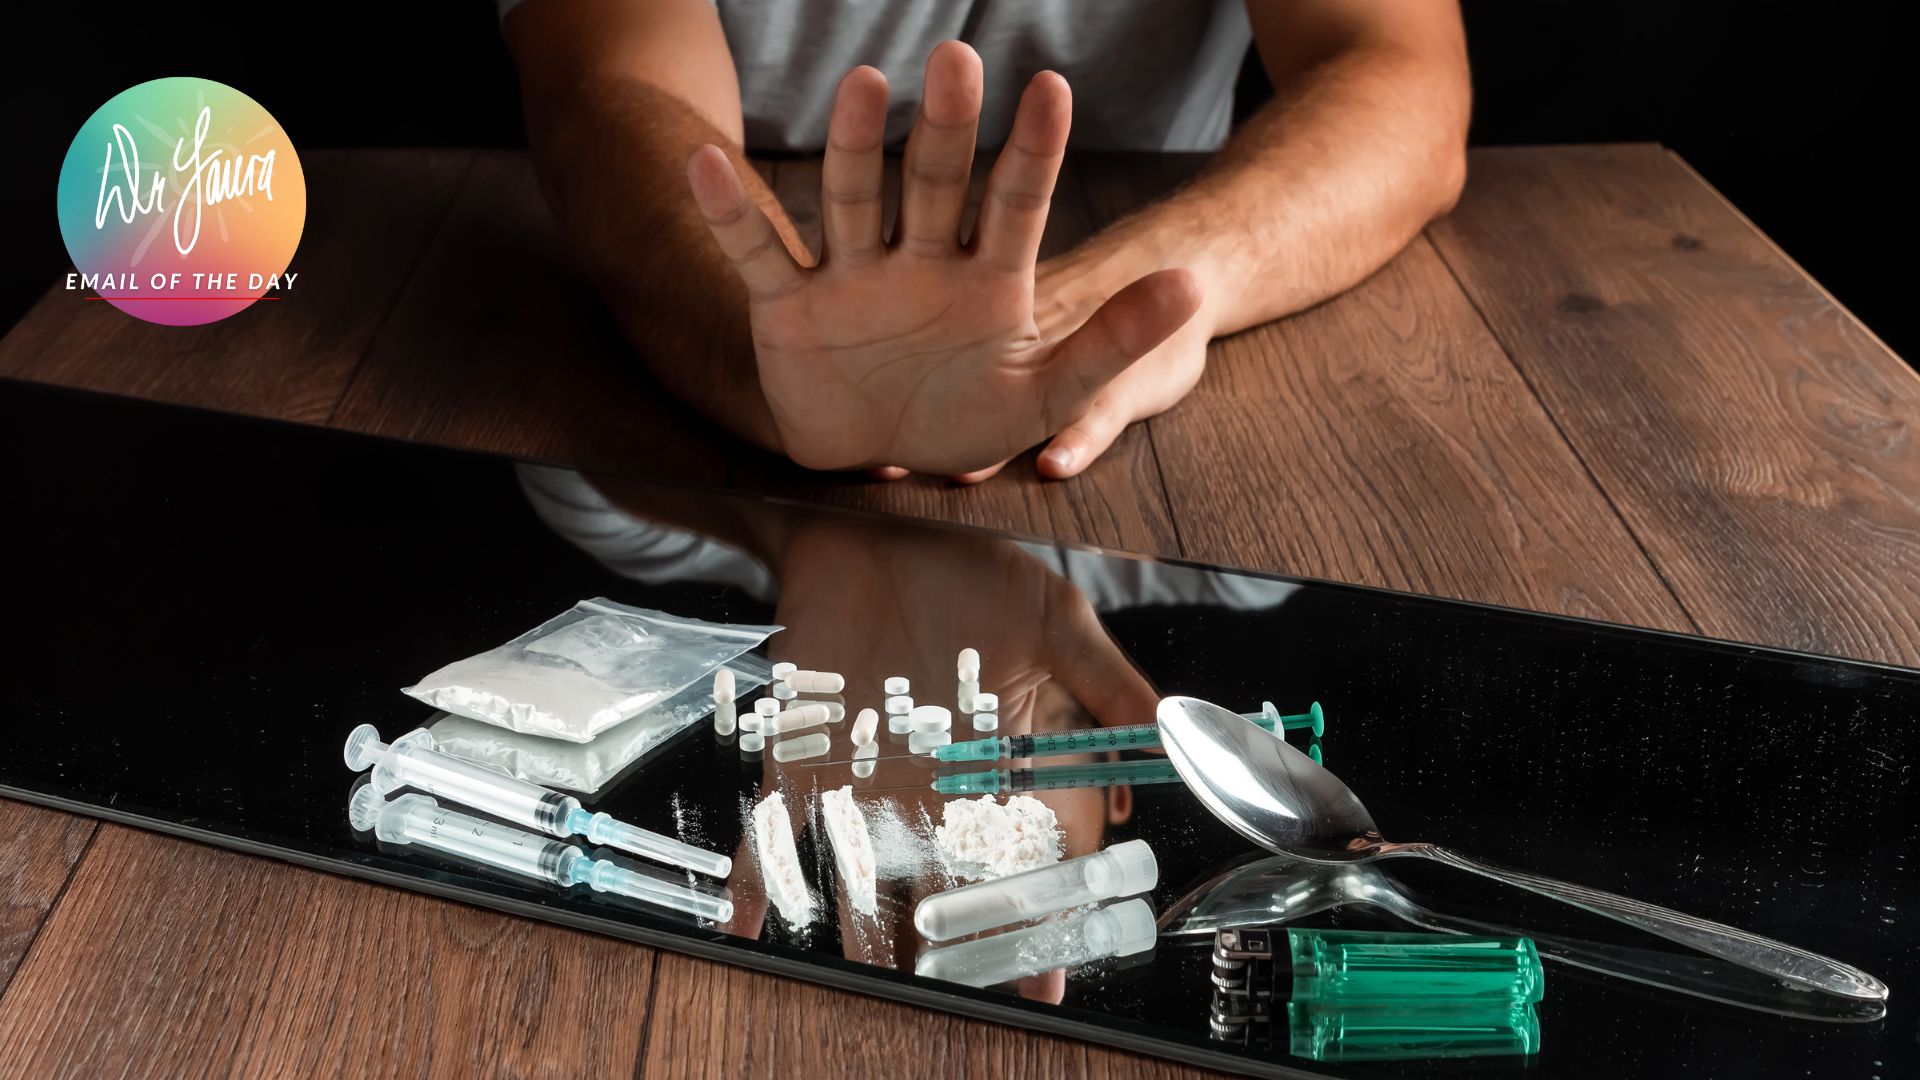 An open hand rejects a tray of drugs